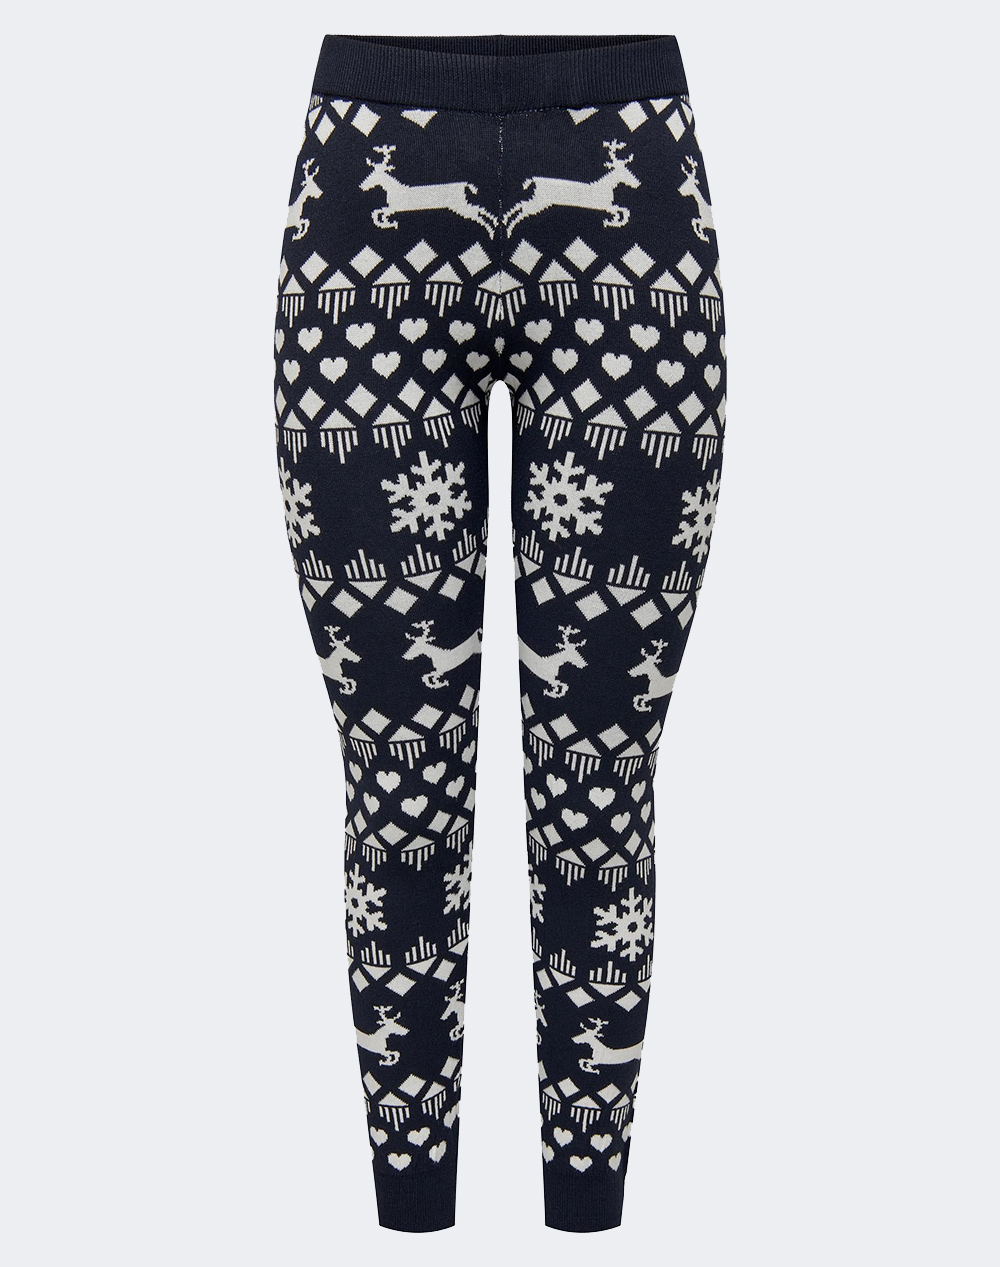 ONLY ONLXMAS SNOWFLAKE PANT KNT 15302952-Night SkyCloud Dancer DarkBlue 3710AONLY2000061_XR26504